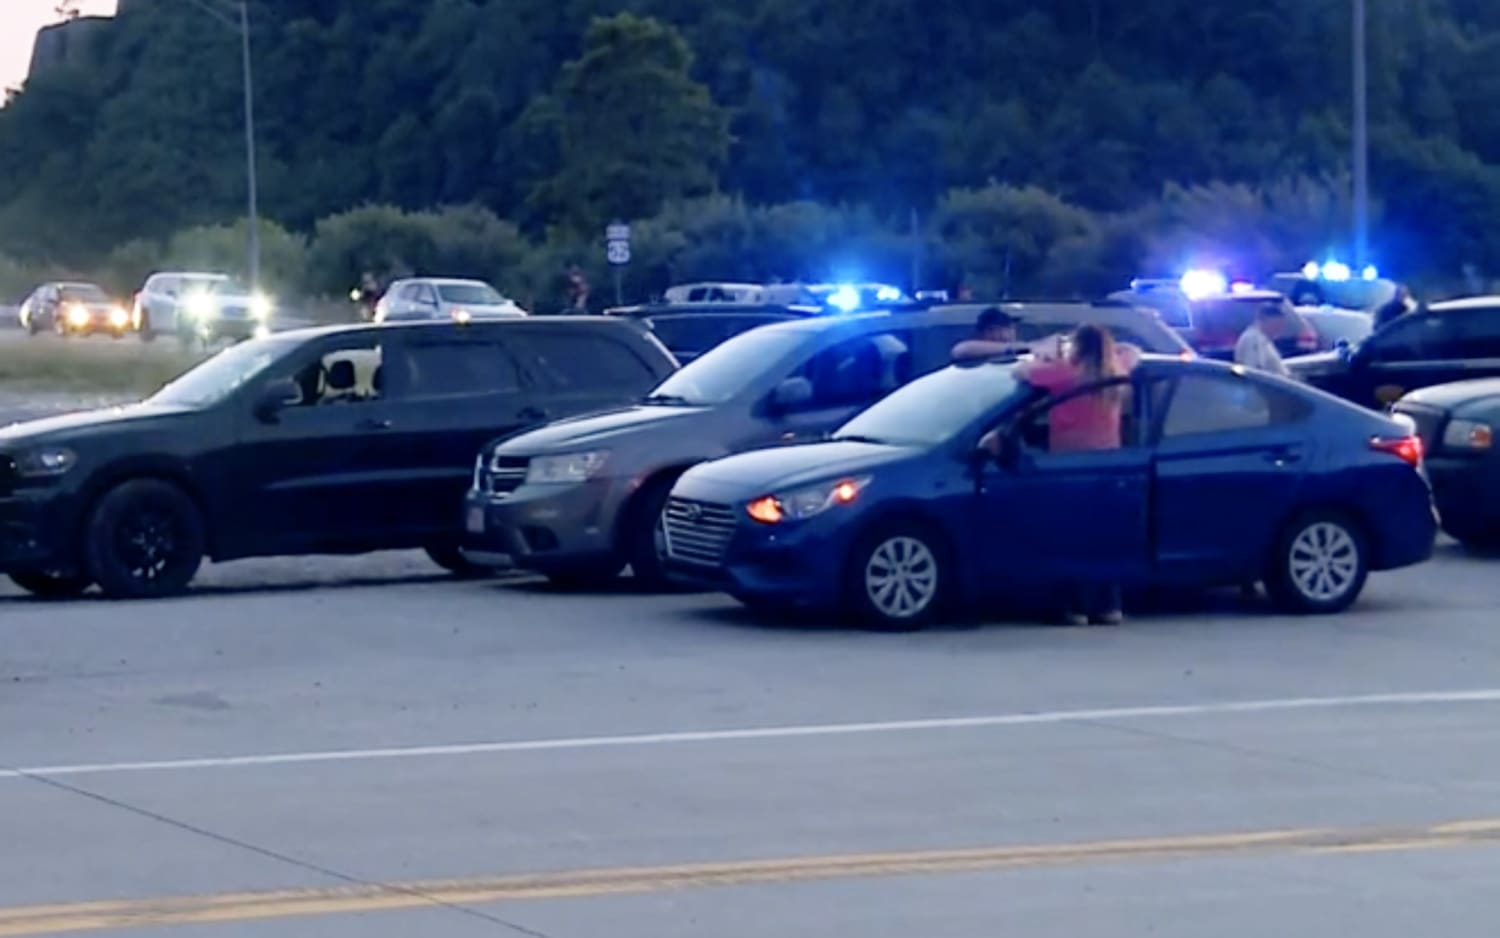 West Virginia state trooper fatally shot, suspect caught after extensive search